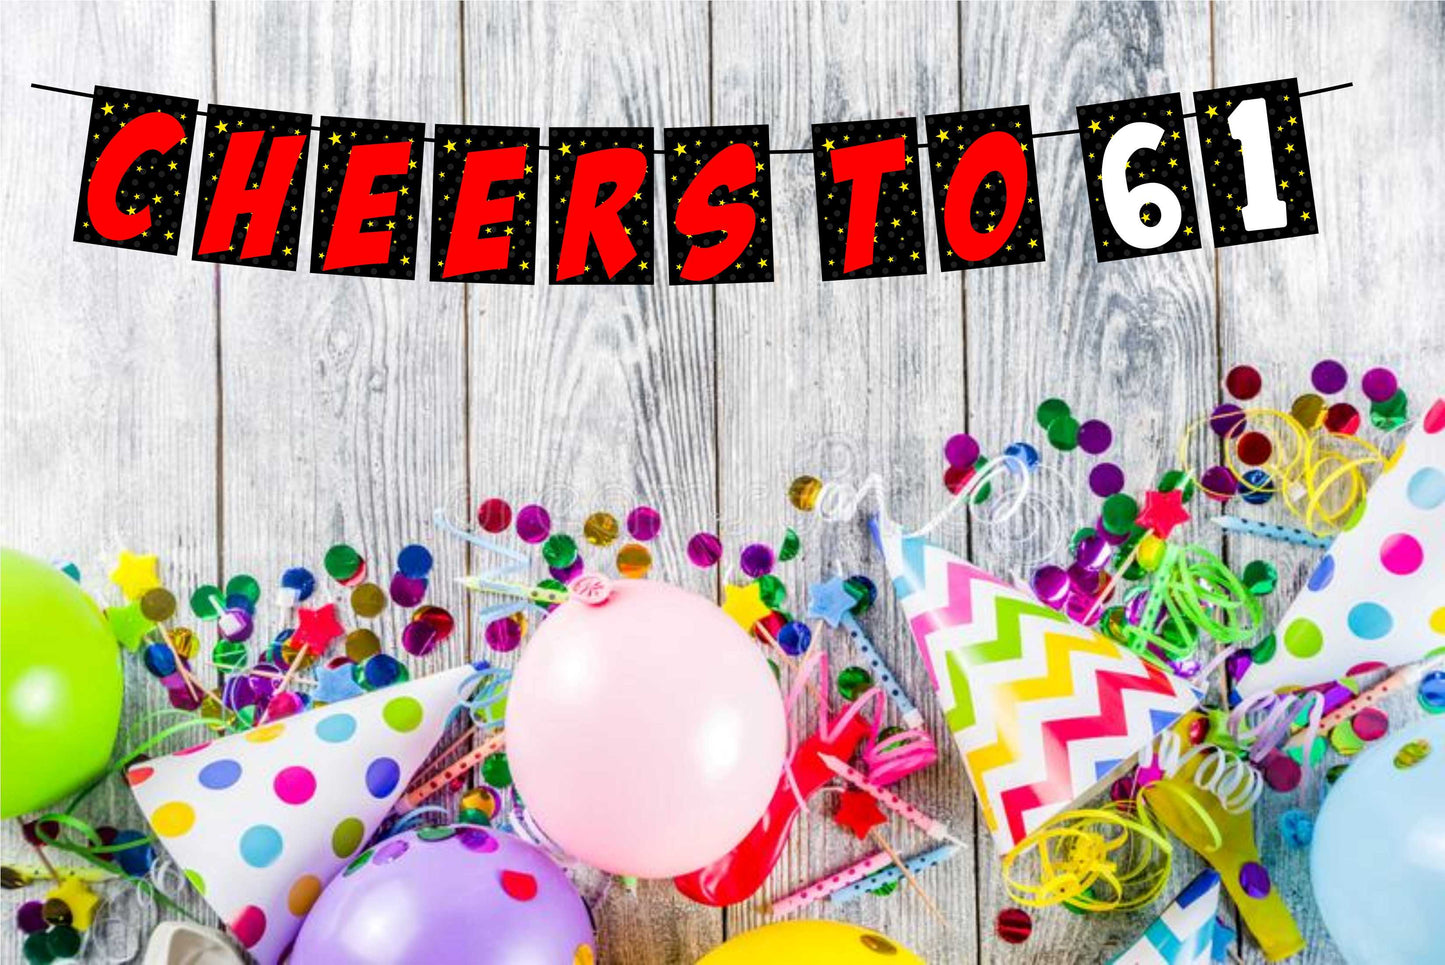 Cheers to 61 Birthday Banner for Photo Shoot Backdrop and Theme Party